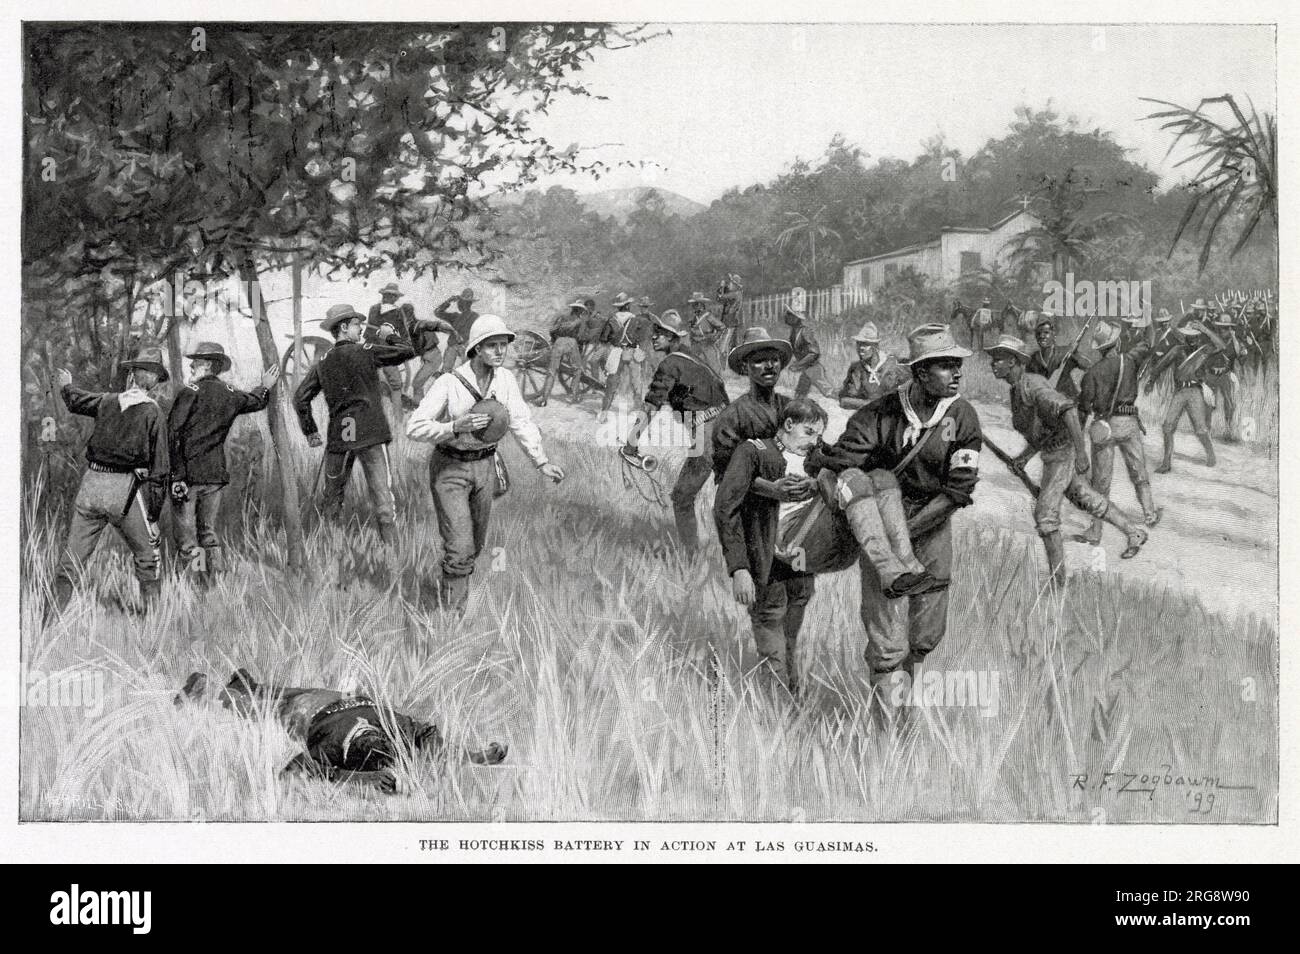 LAS GUASIMAS The American Hotchkiss battery in action in June 1898. Stock Photo